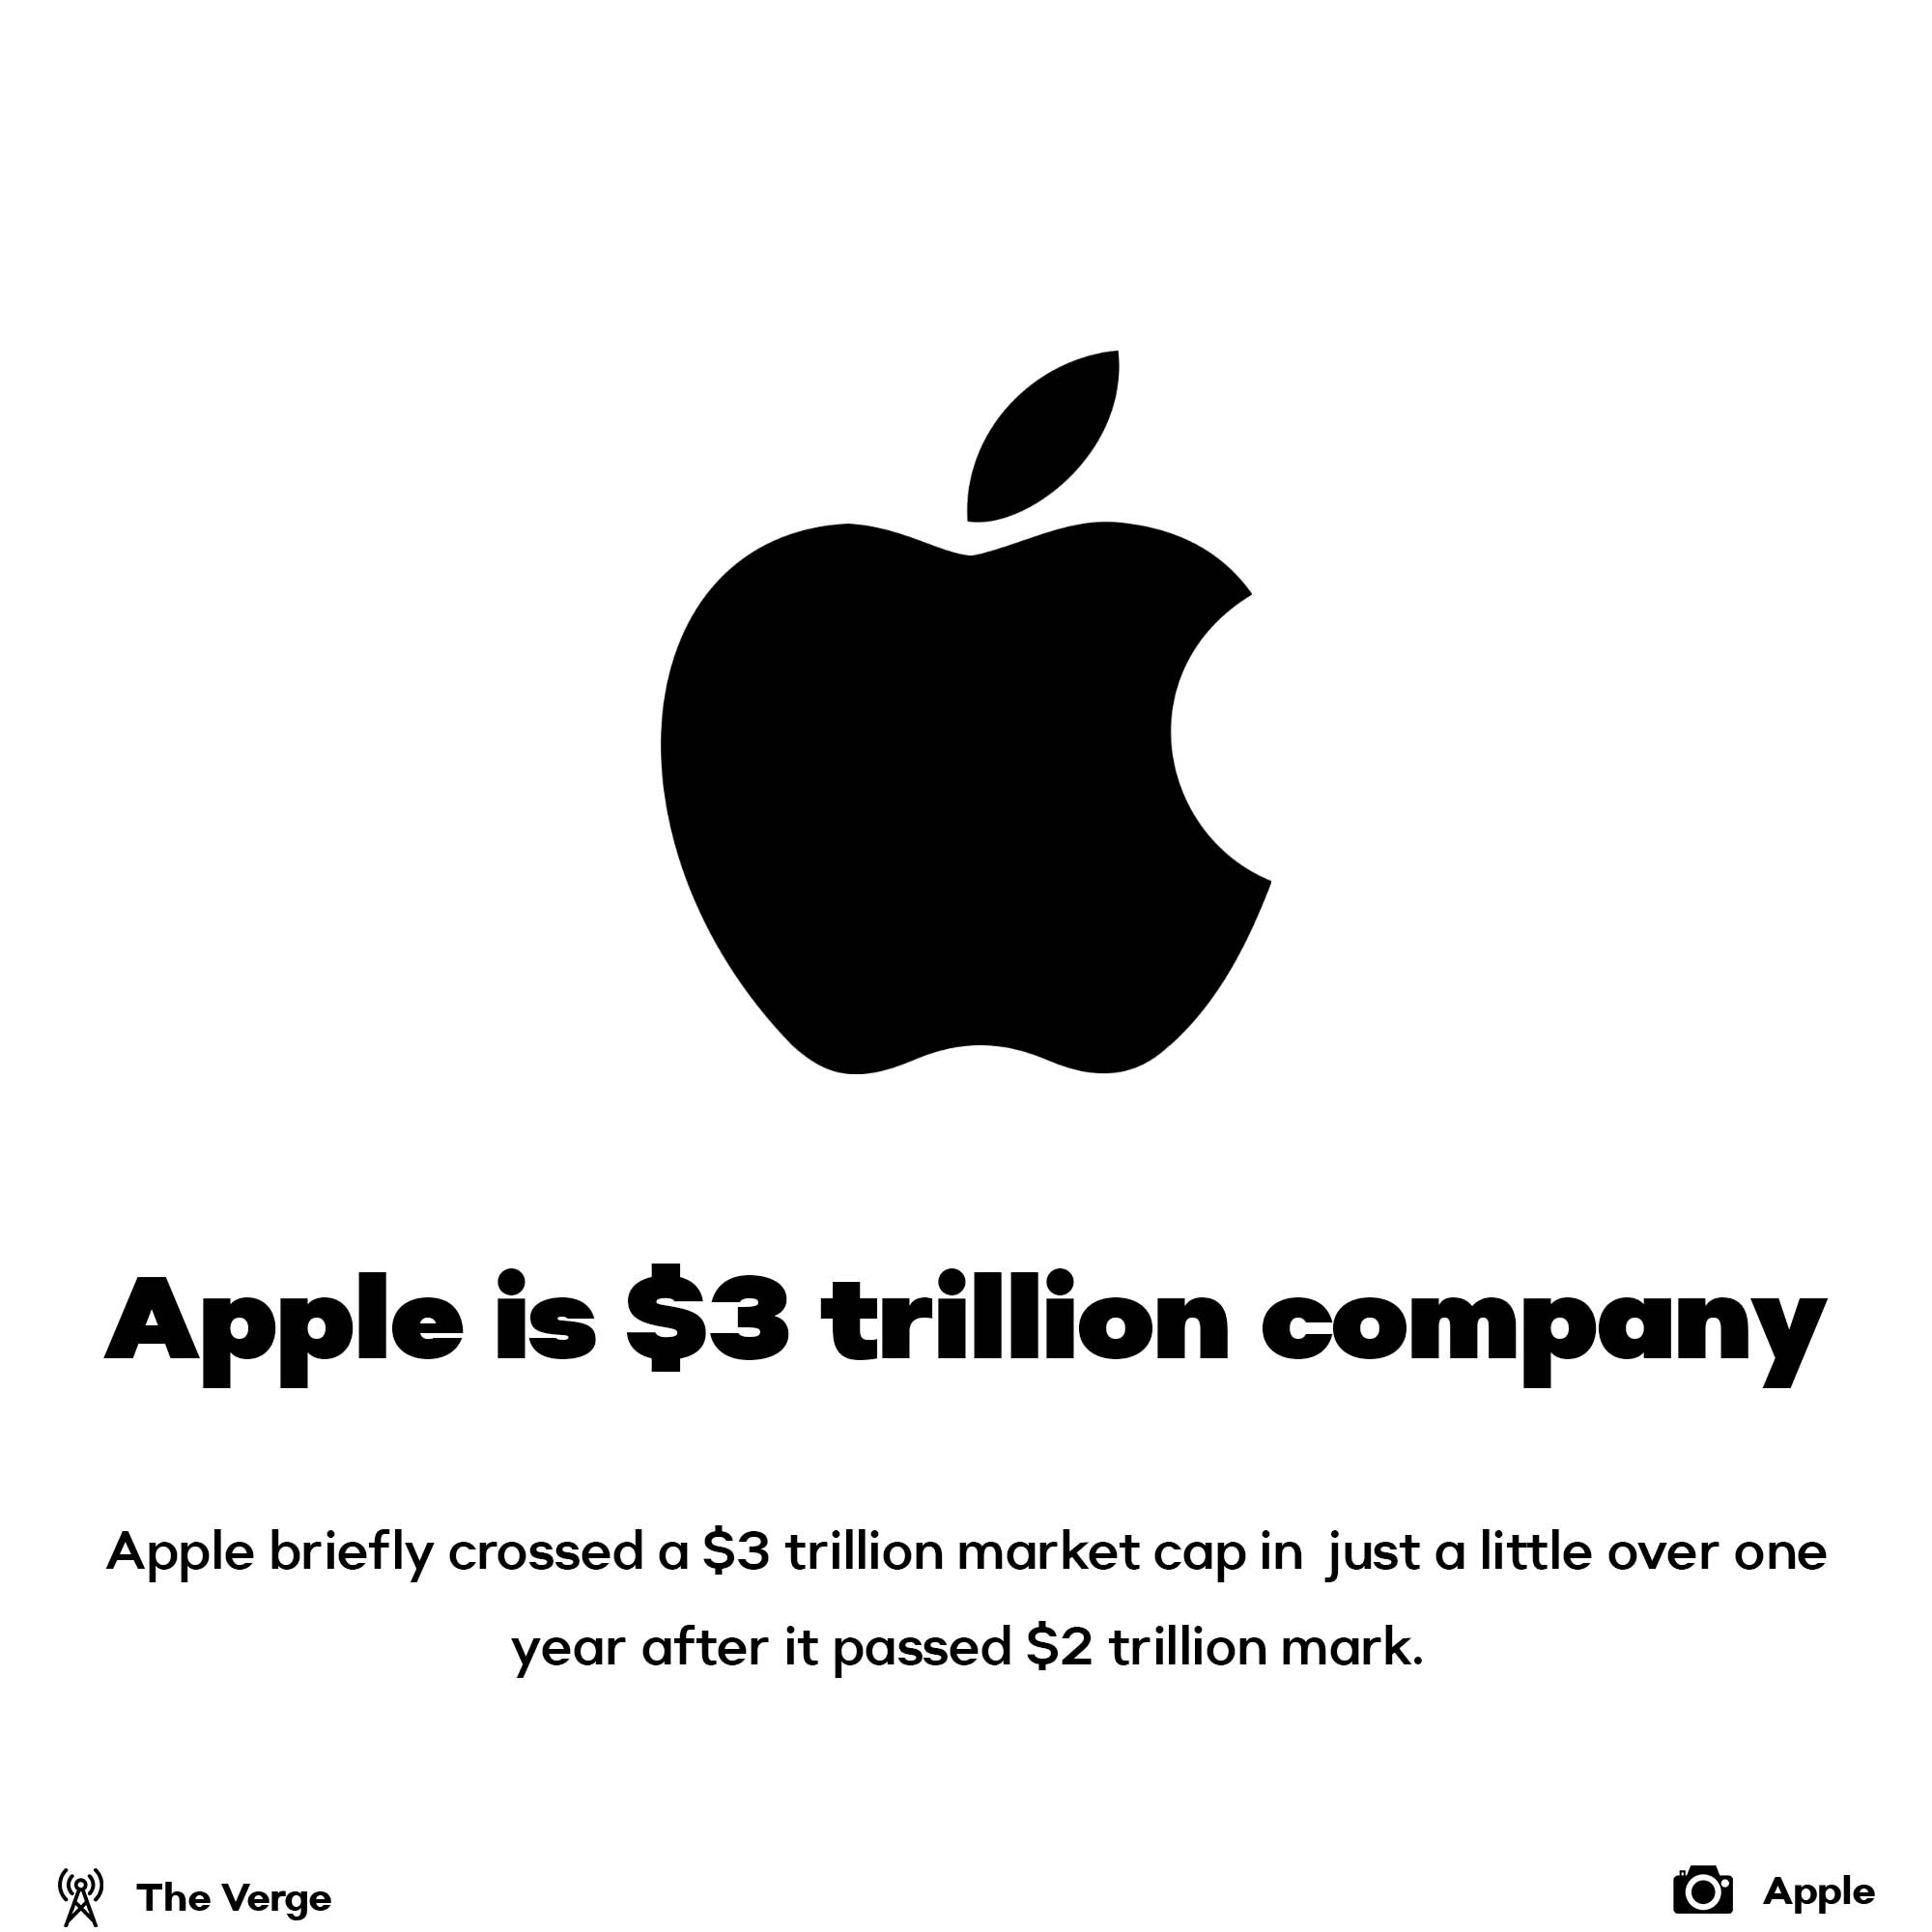 Apple is a $3 trillion company